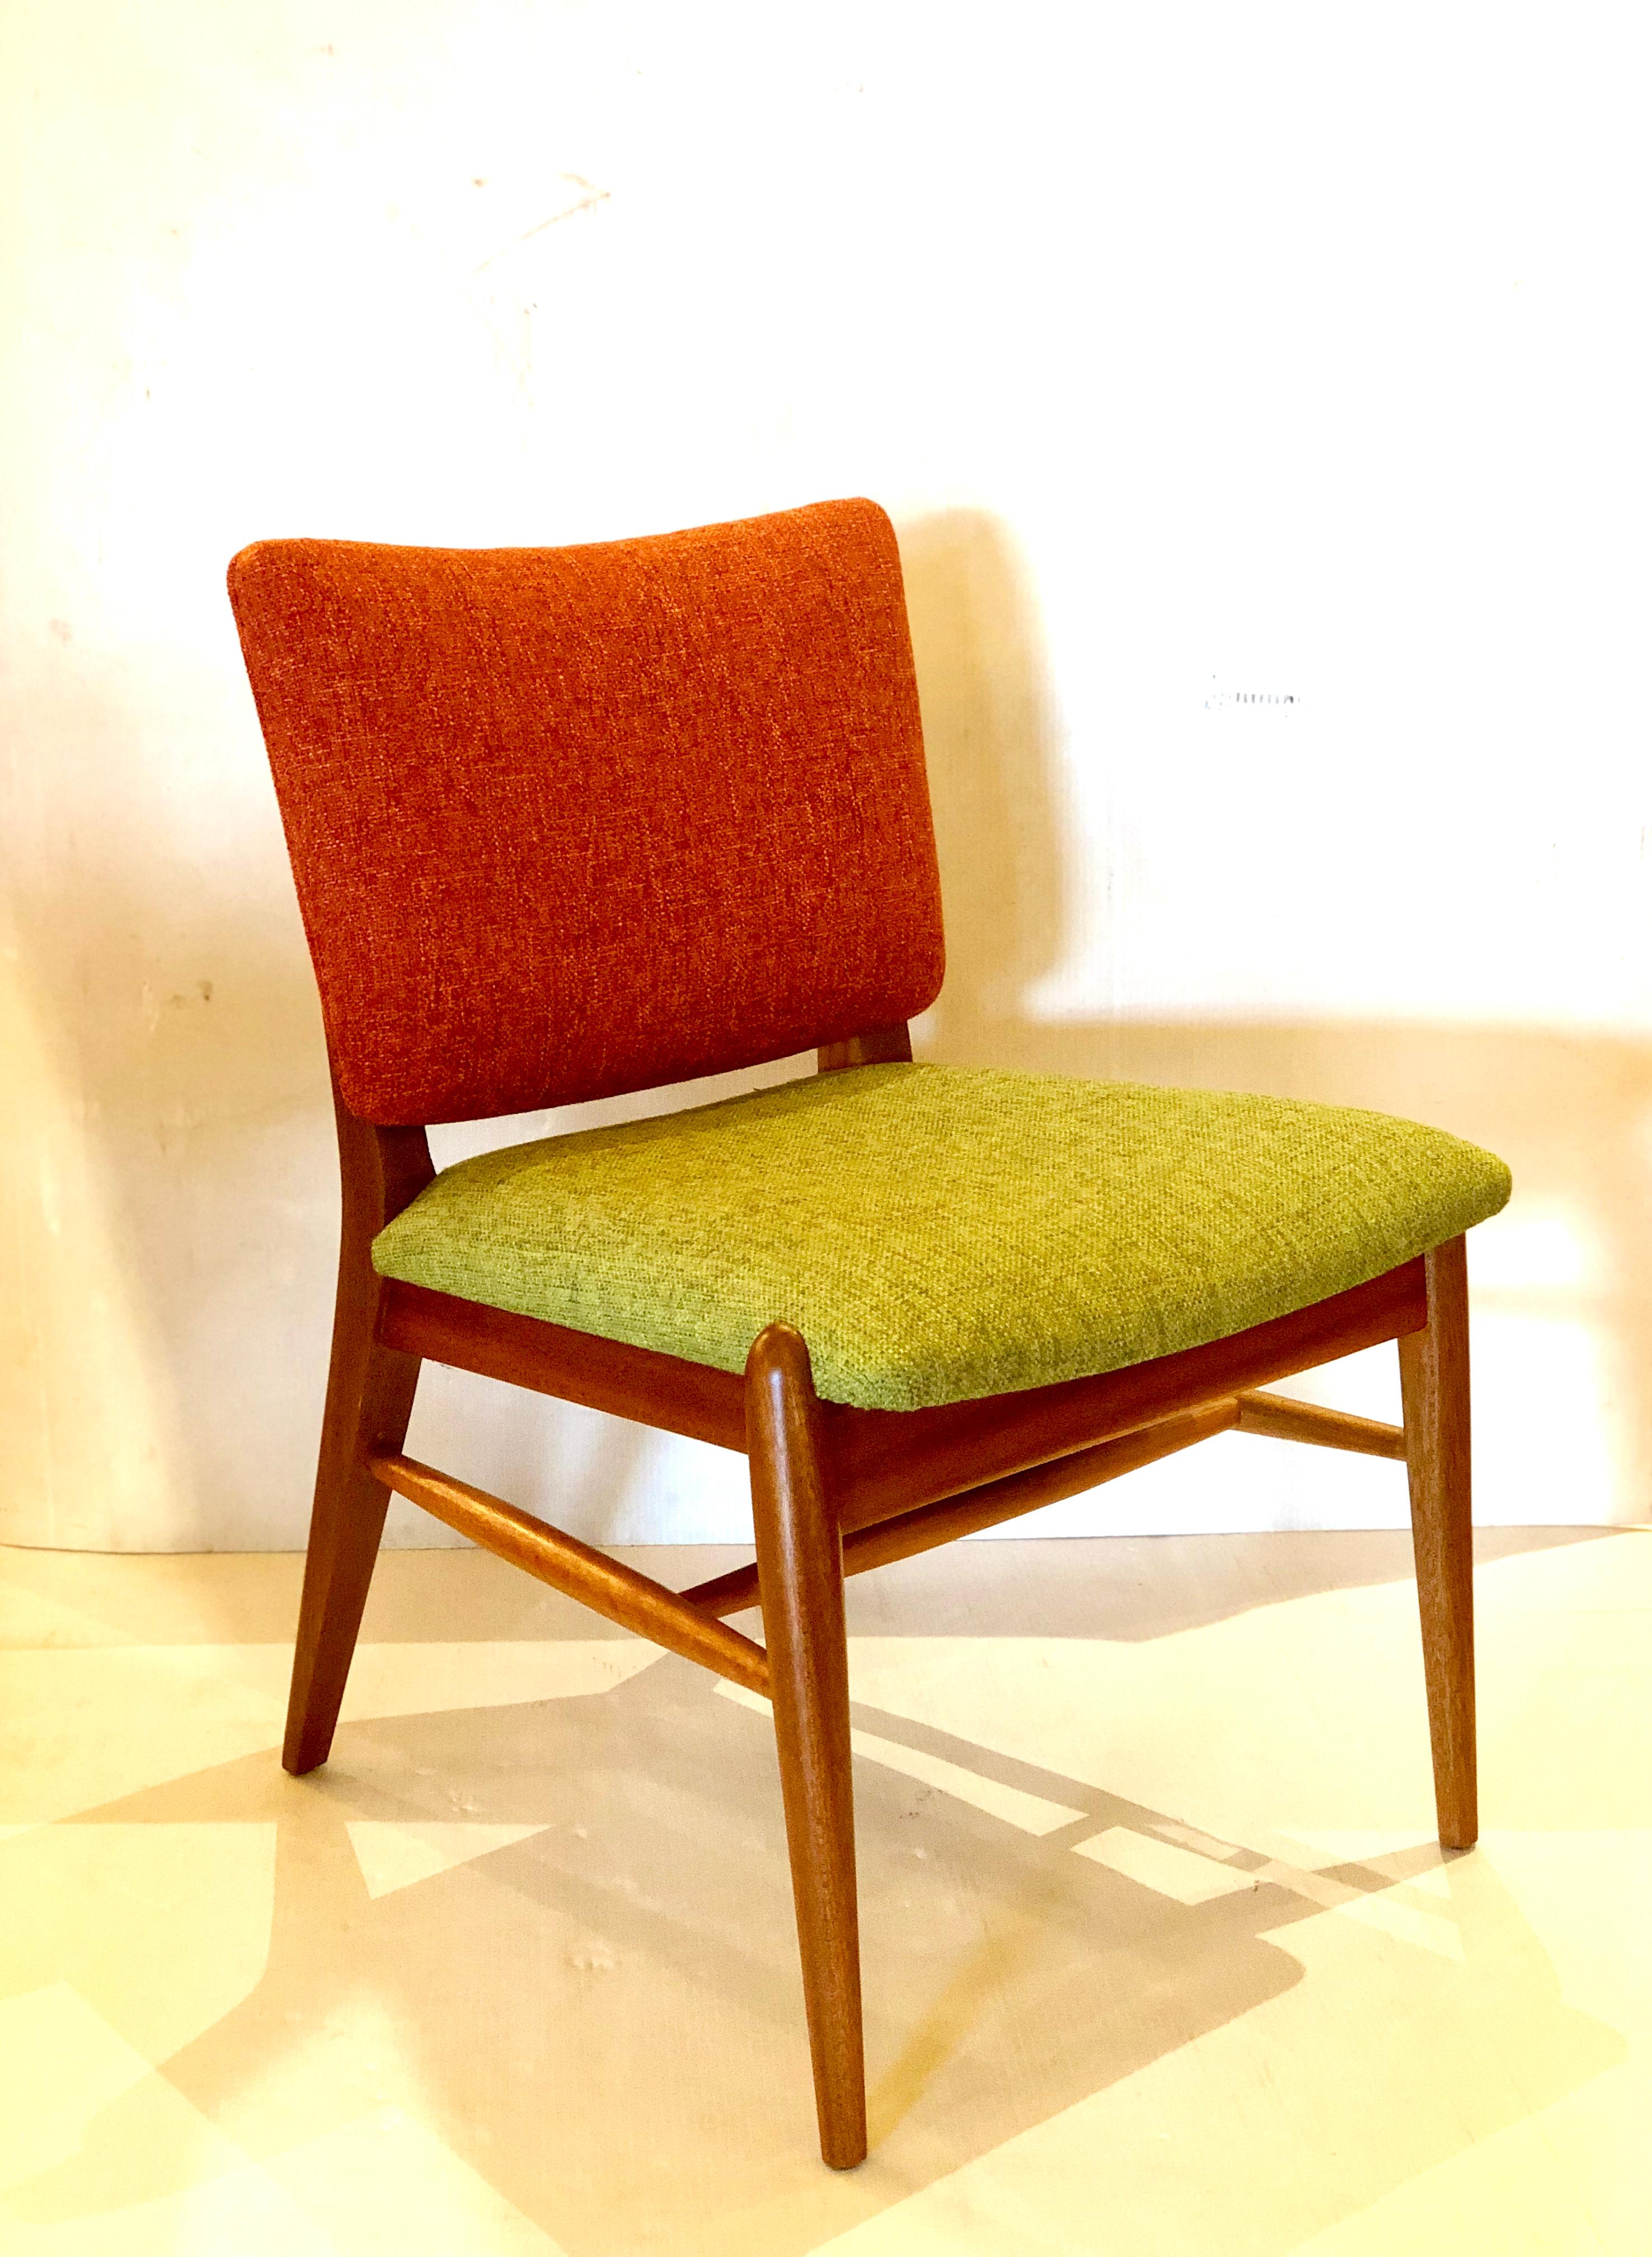 Rare set of 4 dining chairs designed by John Keal for Brown Saltman, circa 1950s freshly refinished and recover in two tone material, by Knoll the solid mahogany frames have been refinished these chairs are solid and sturdy new foam and new fabric.